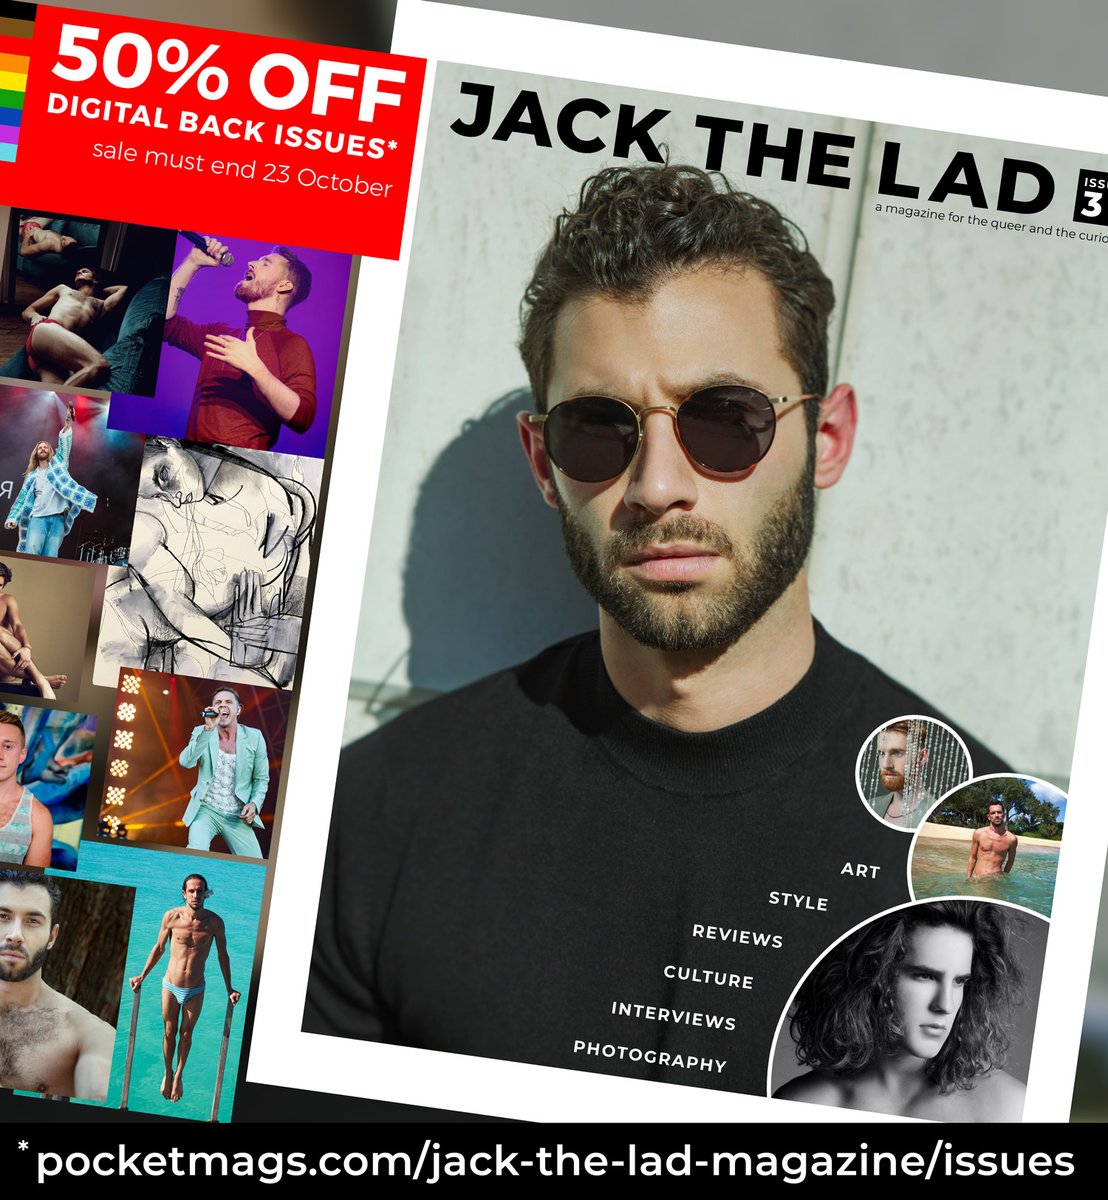 FLASH SALE! There's only two days left if you want to get your hands on any digital back issue of Jack The Lad for half the original price! pocketmags.com/jack-the-lad-m… Sale ends midnight (BST) Monday 23rd October! Grab the UK's quality queer quarterly for the global LGBTQ+ community!